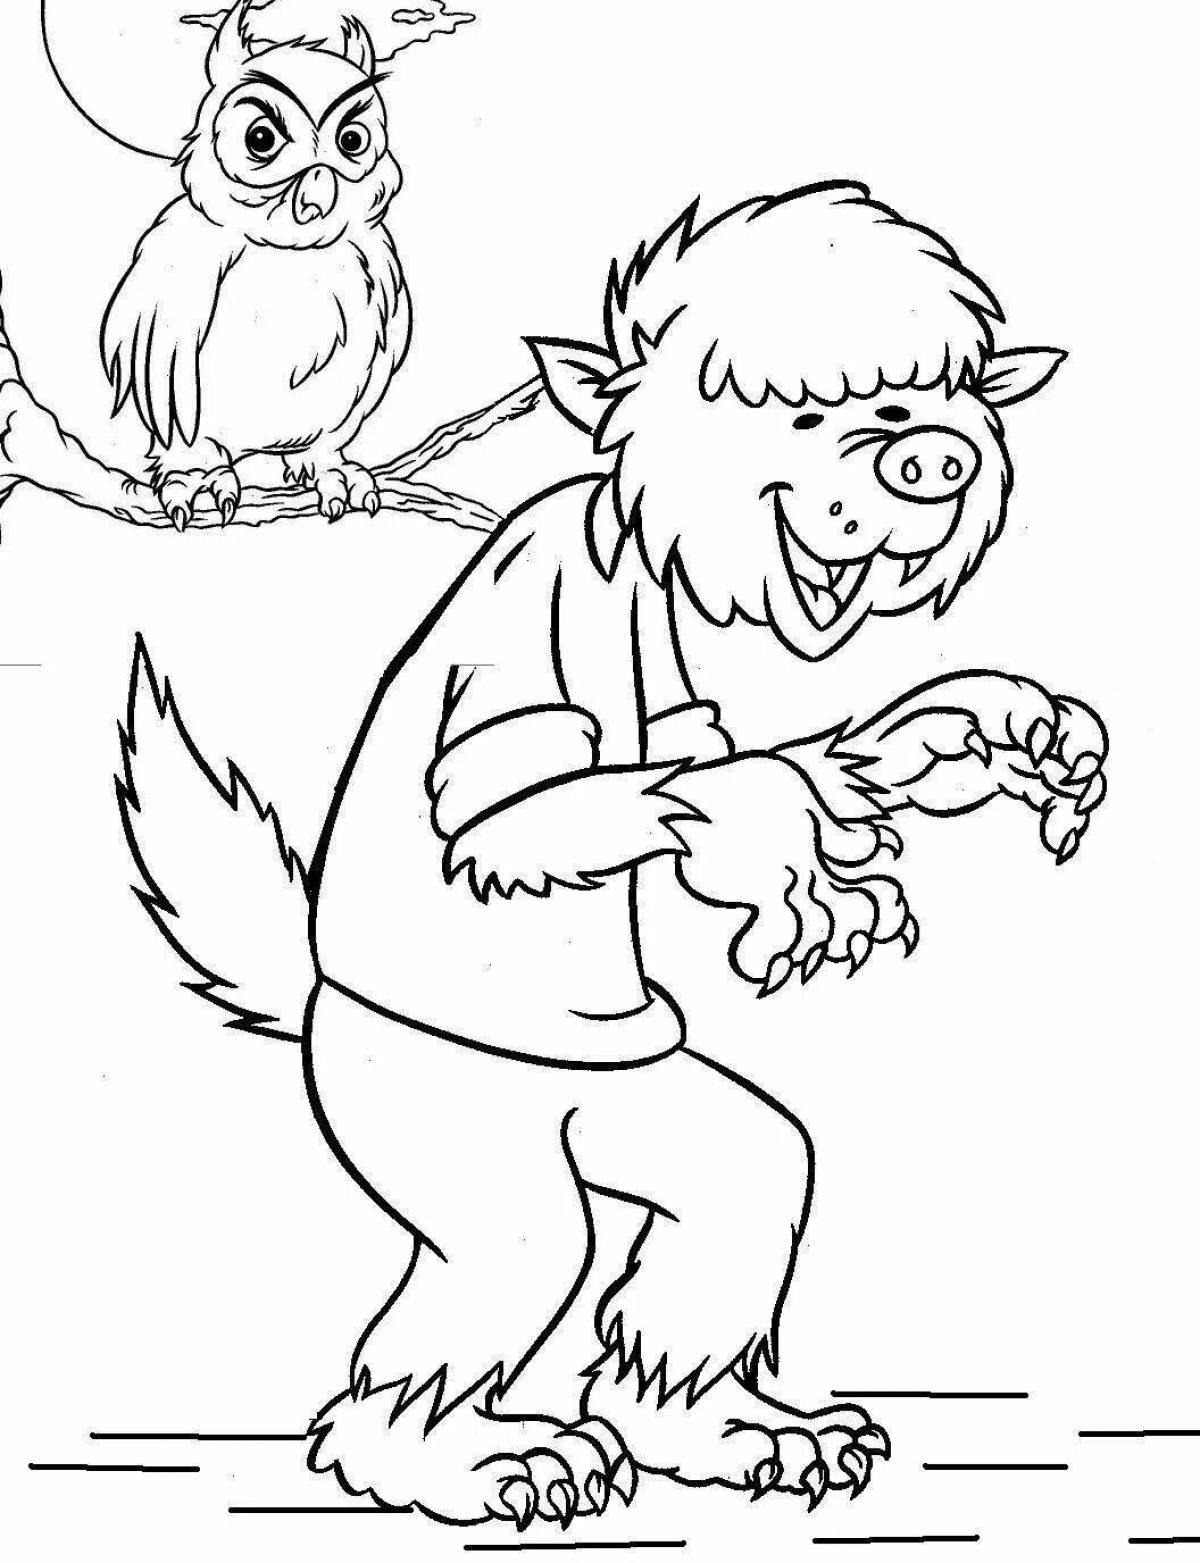 Chilling werewolf coloring pages for kids